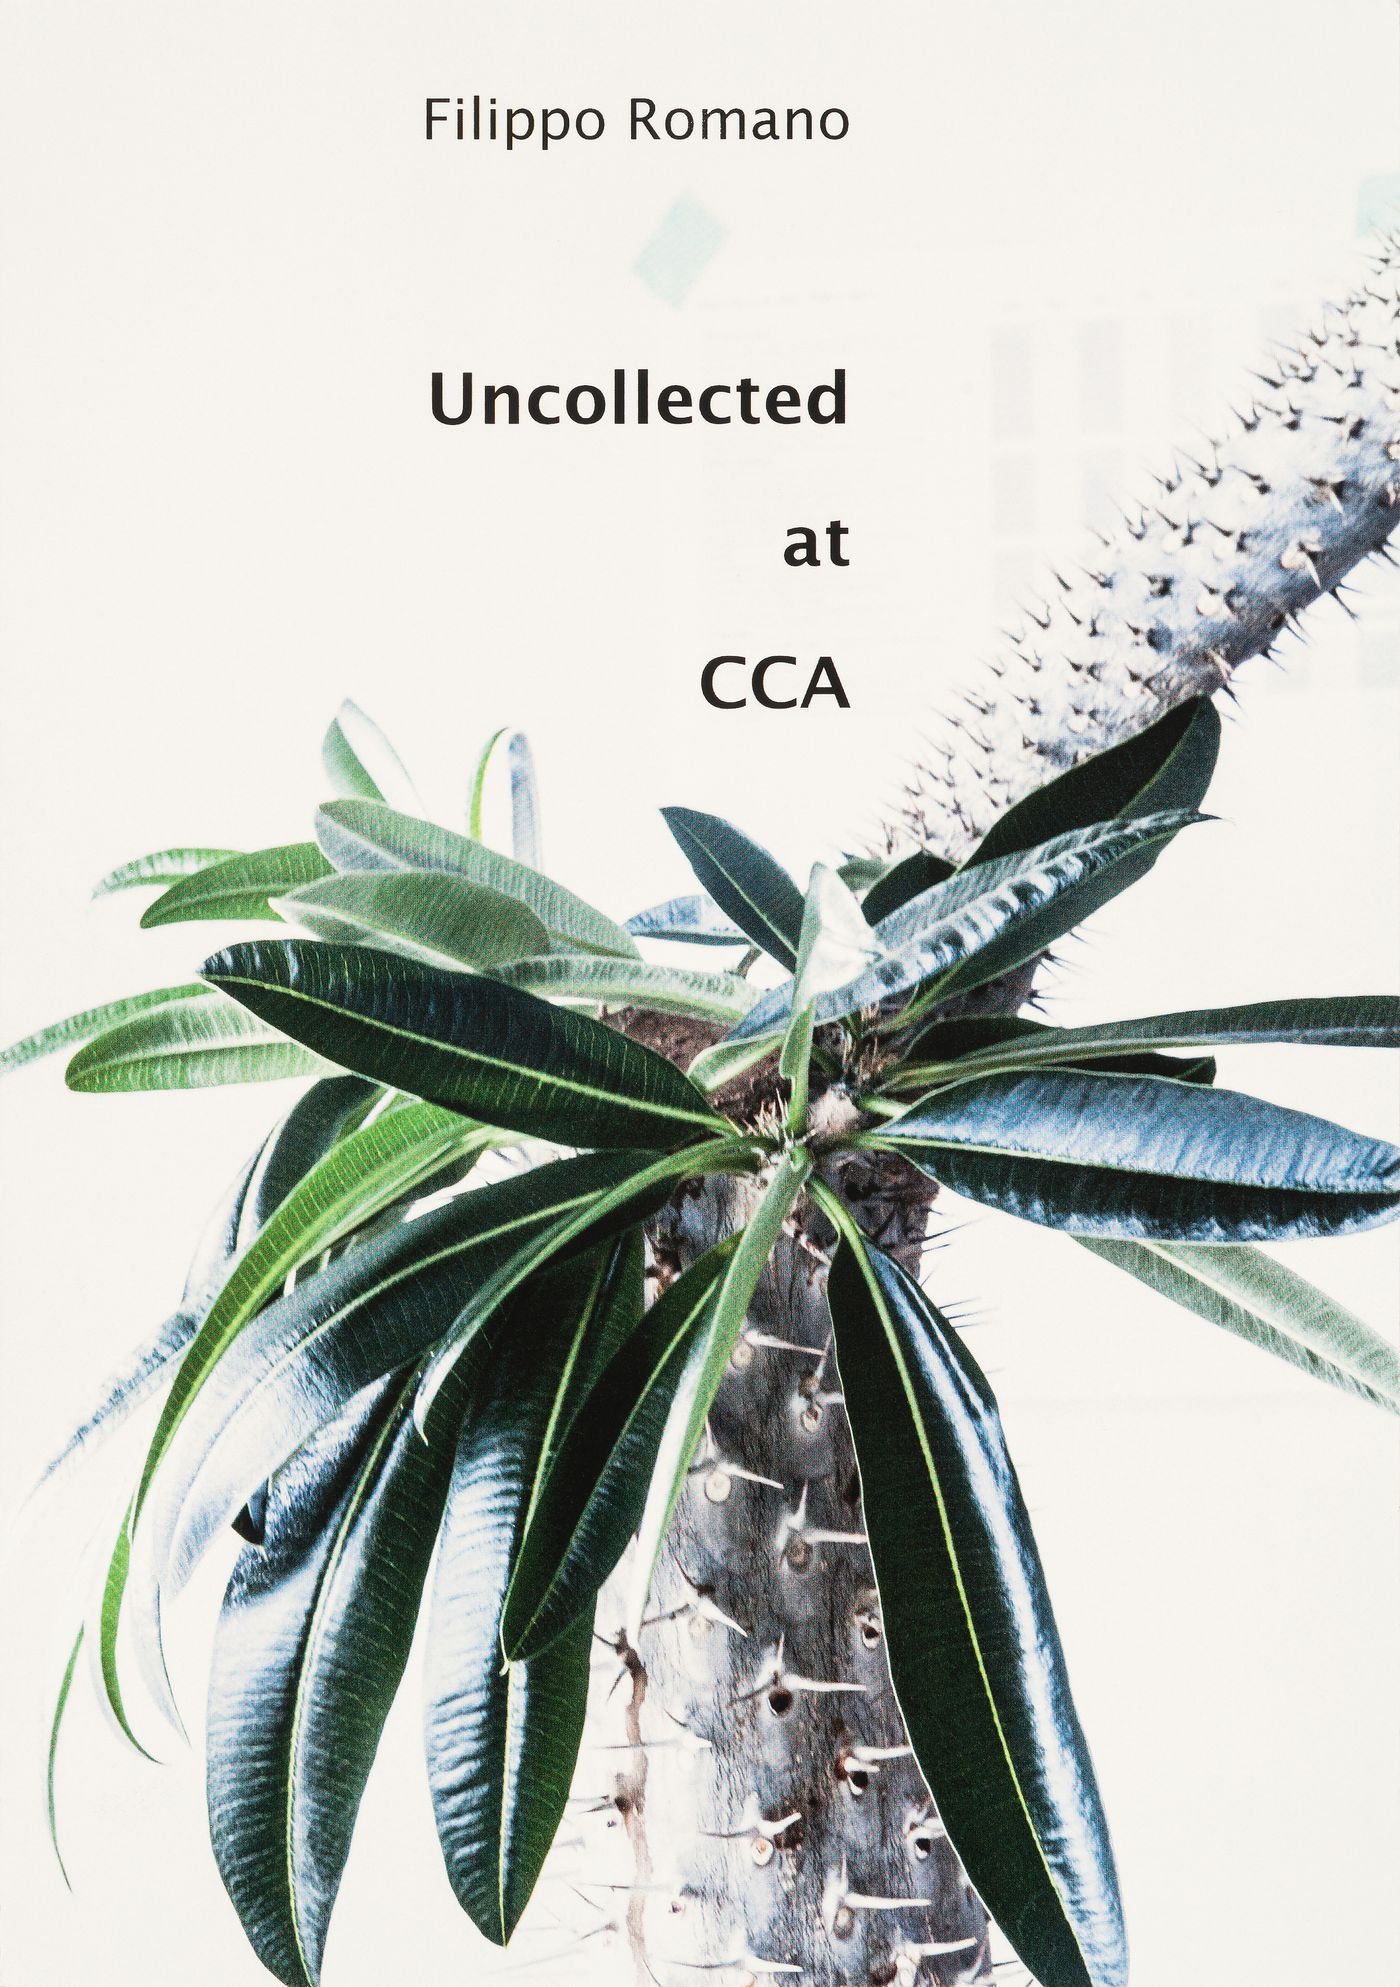 Uncollected at CCA: 50 images of the CCA building